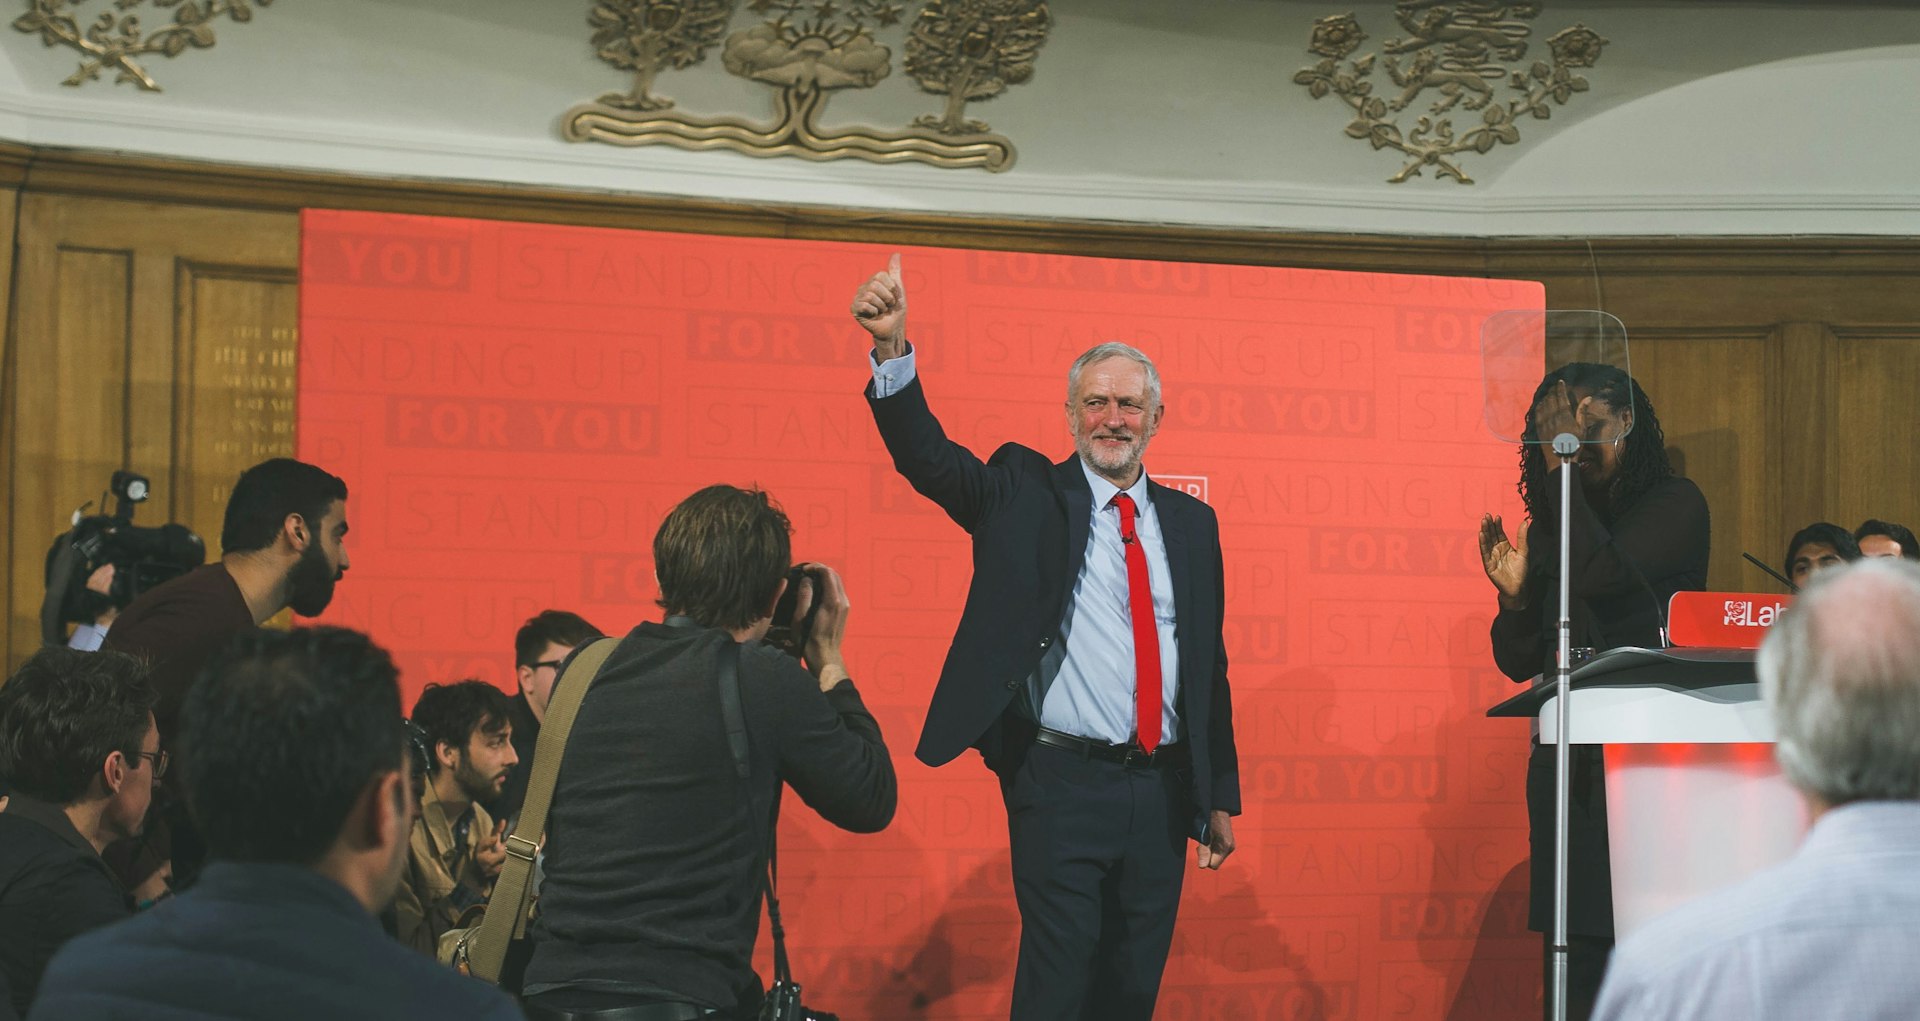 Labour just promised to scrap tuition fees